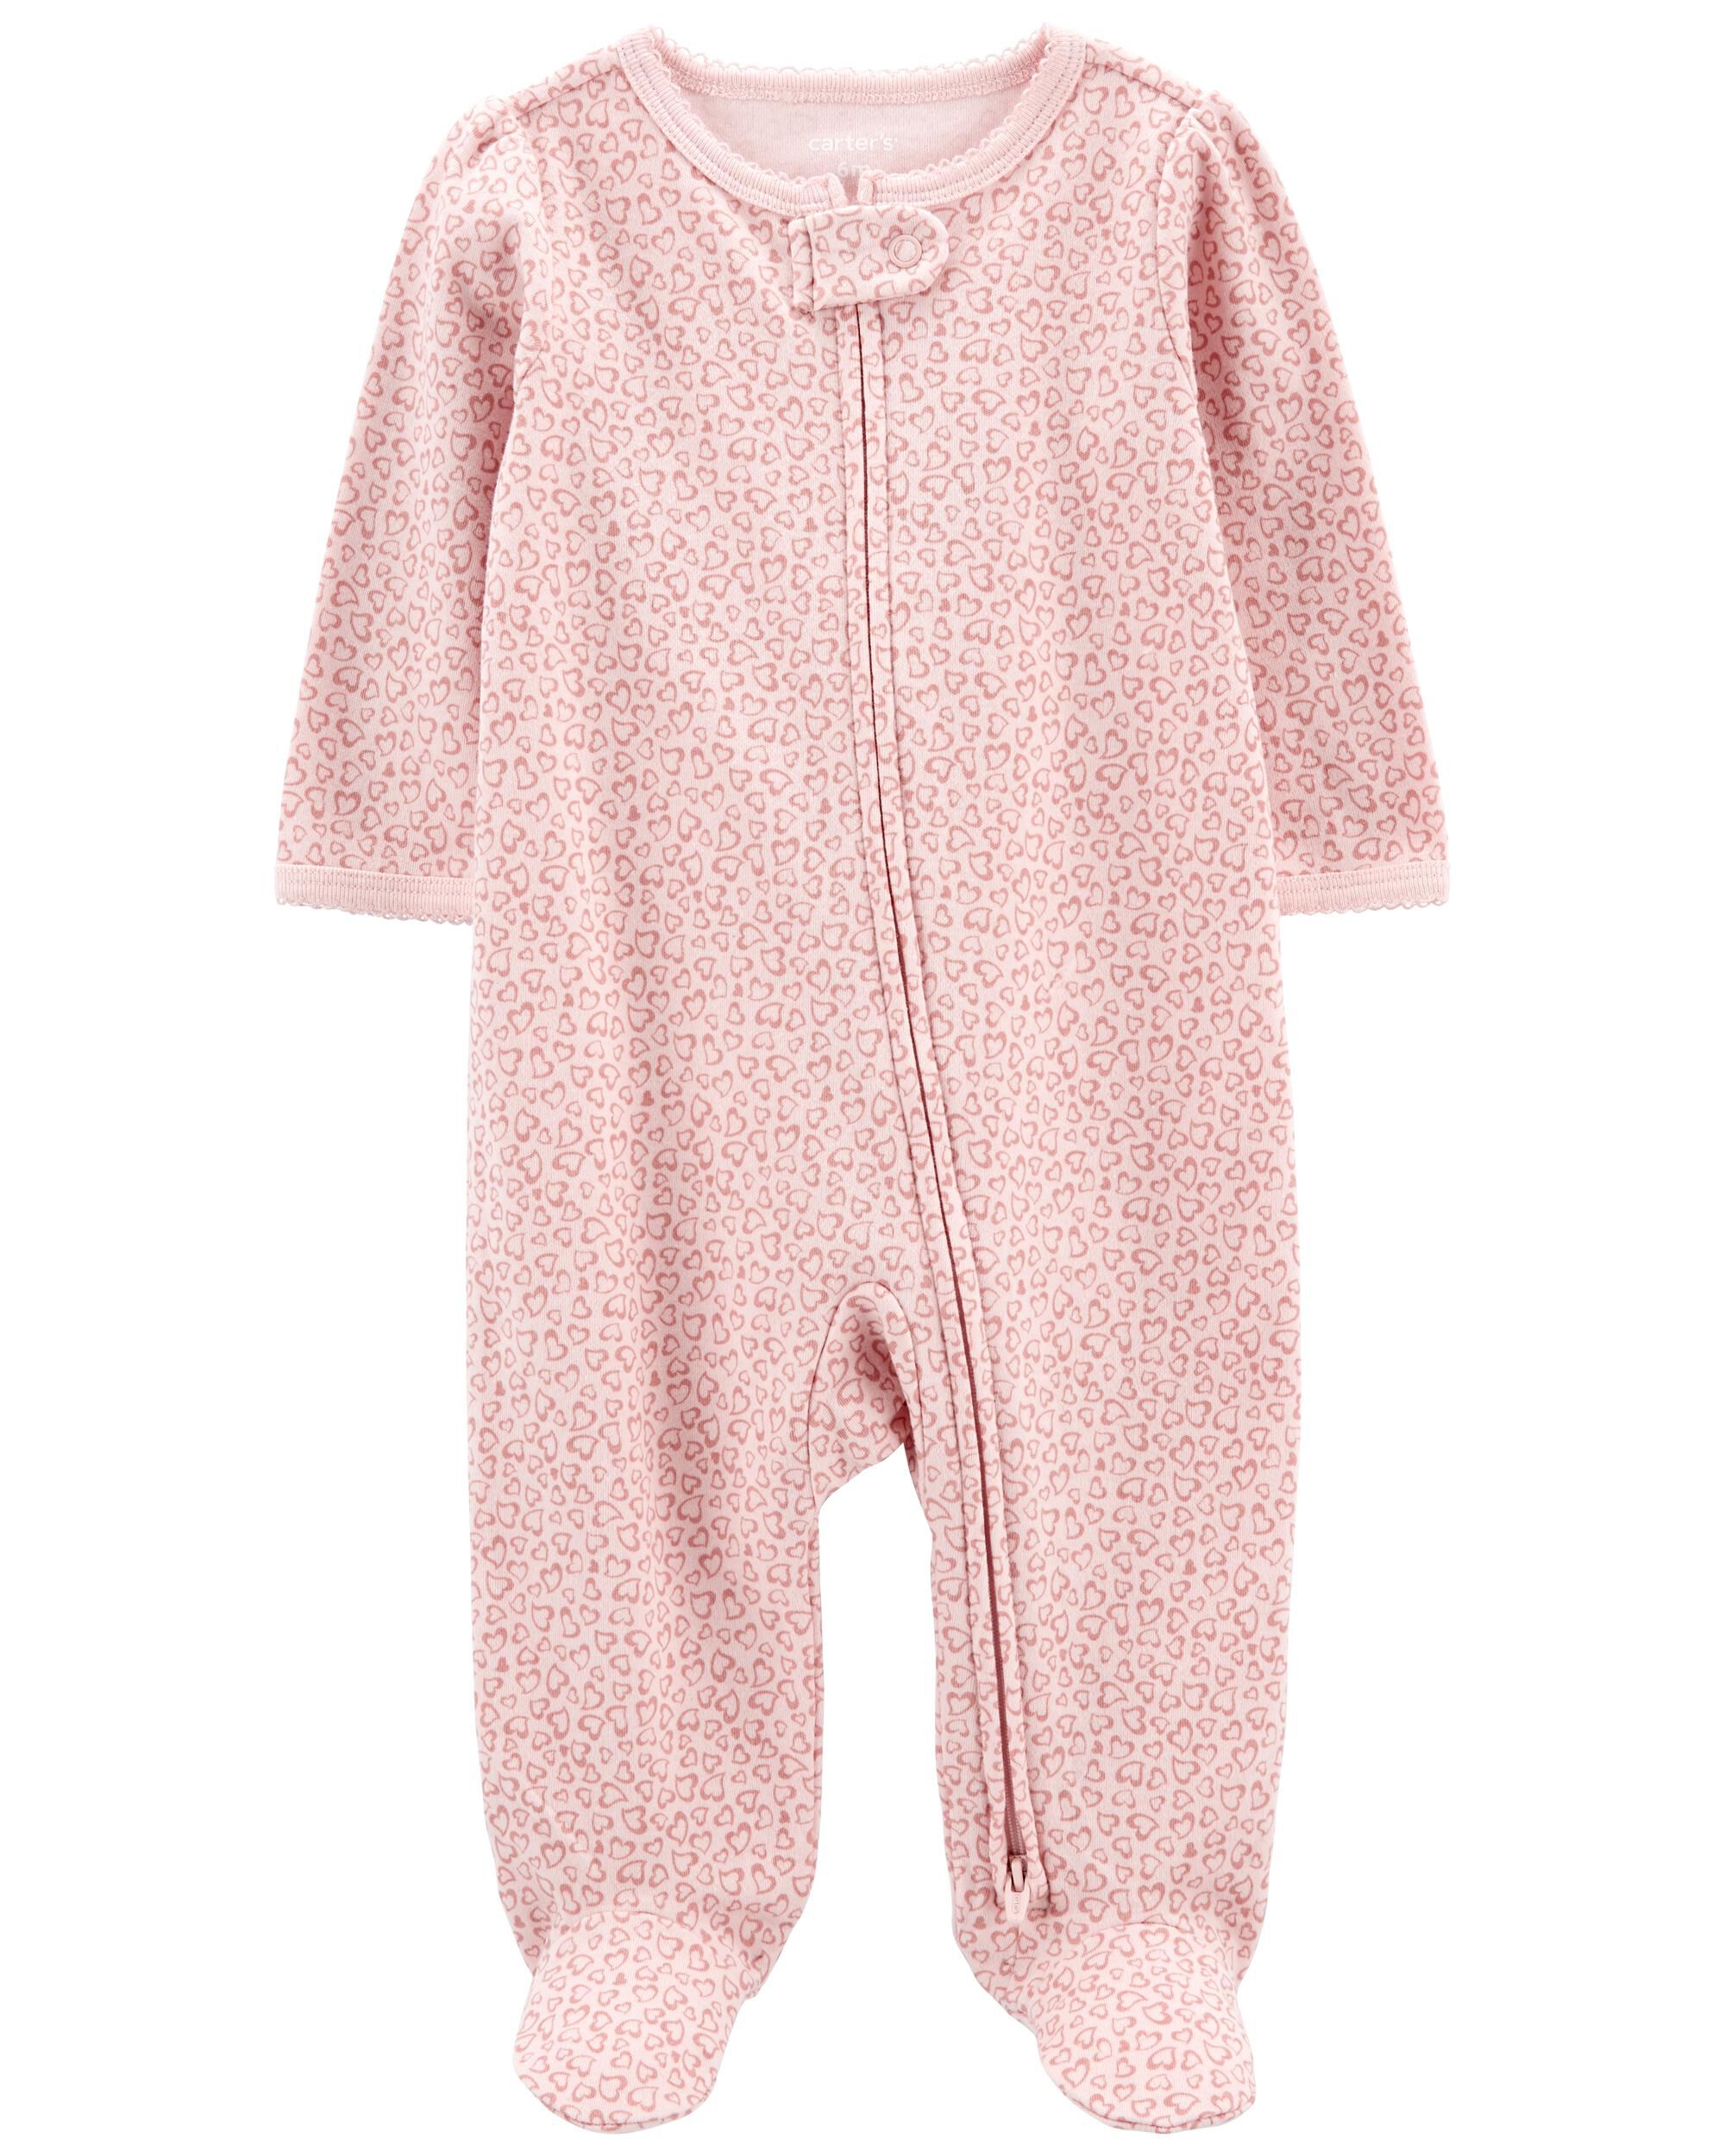 2017 Baby Girls Childrens Thermal Underwear Set Cotton Long Sleeved Pajamas  For Boys And Girls, Warm And Cozy Outfit From Powertoy, $14.28